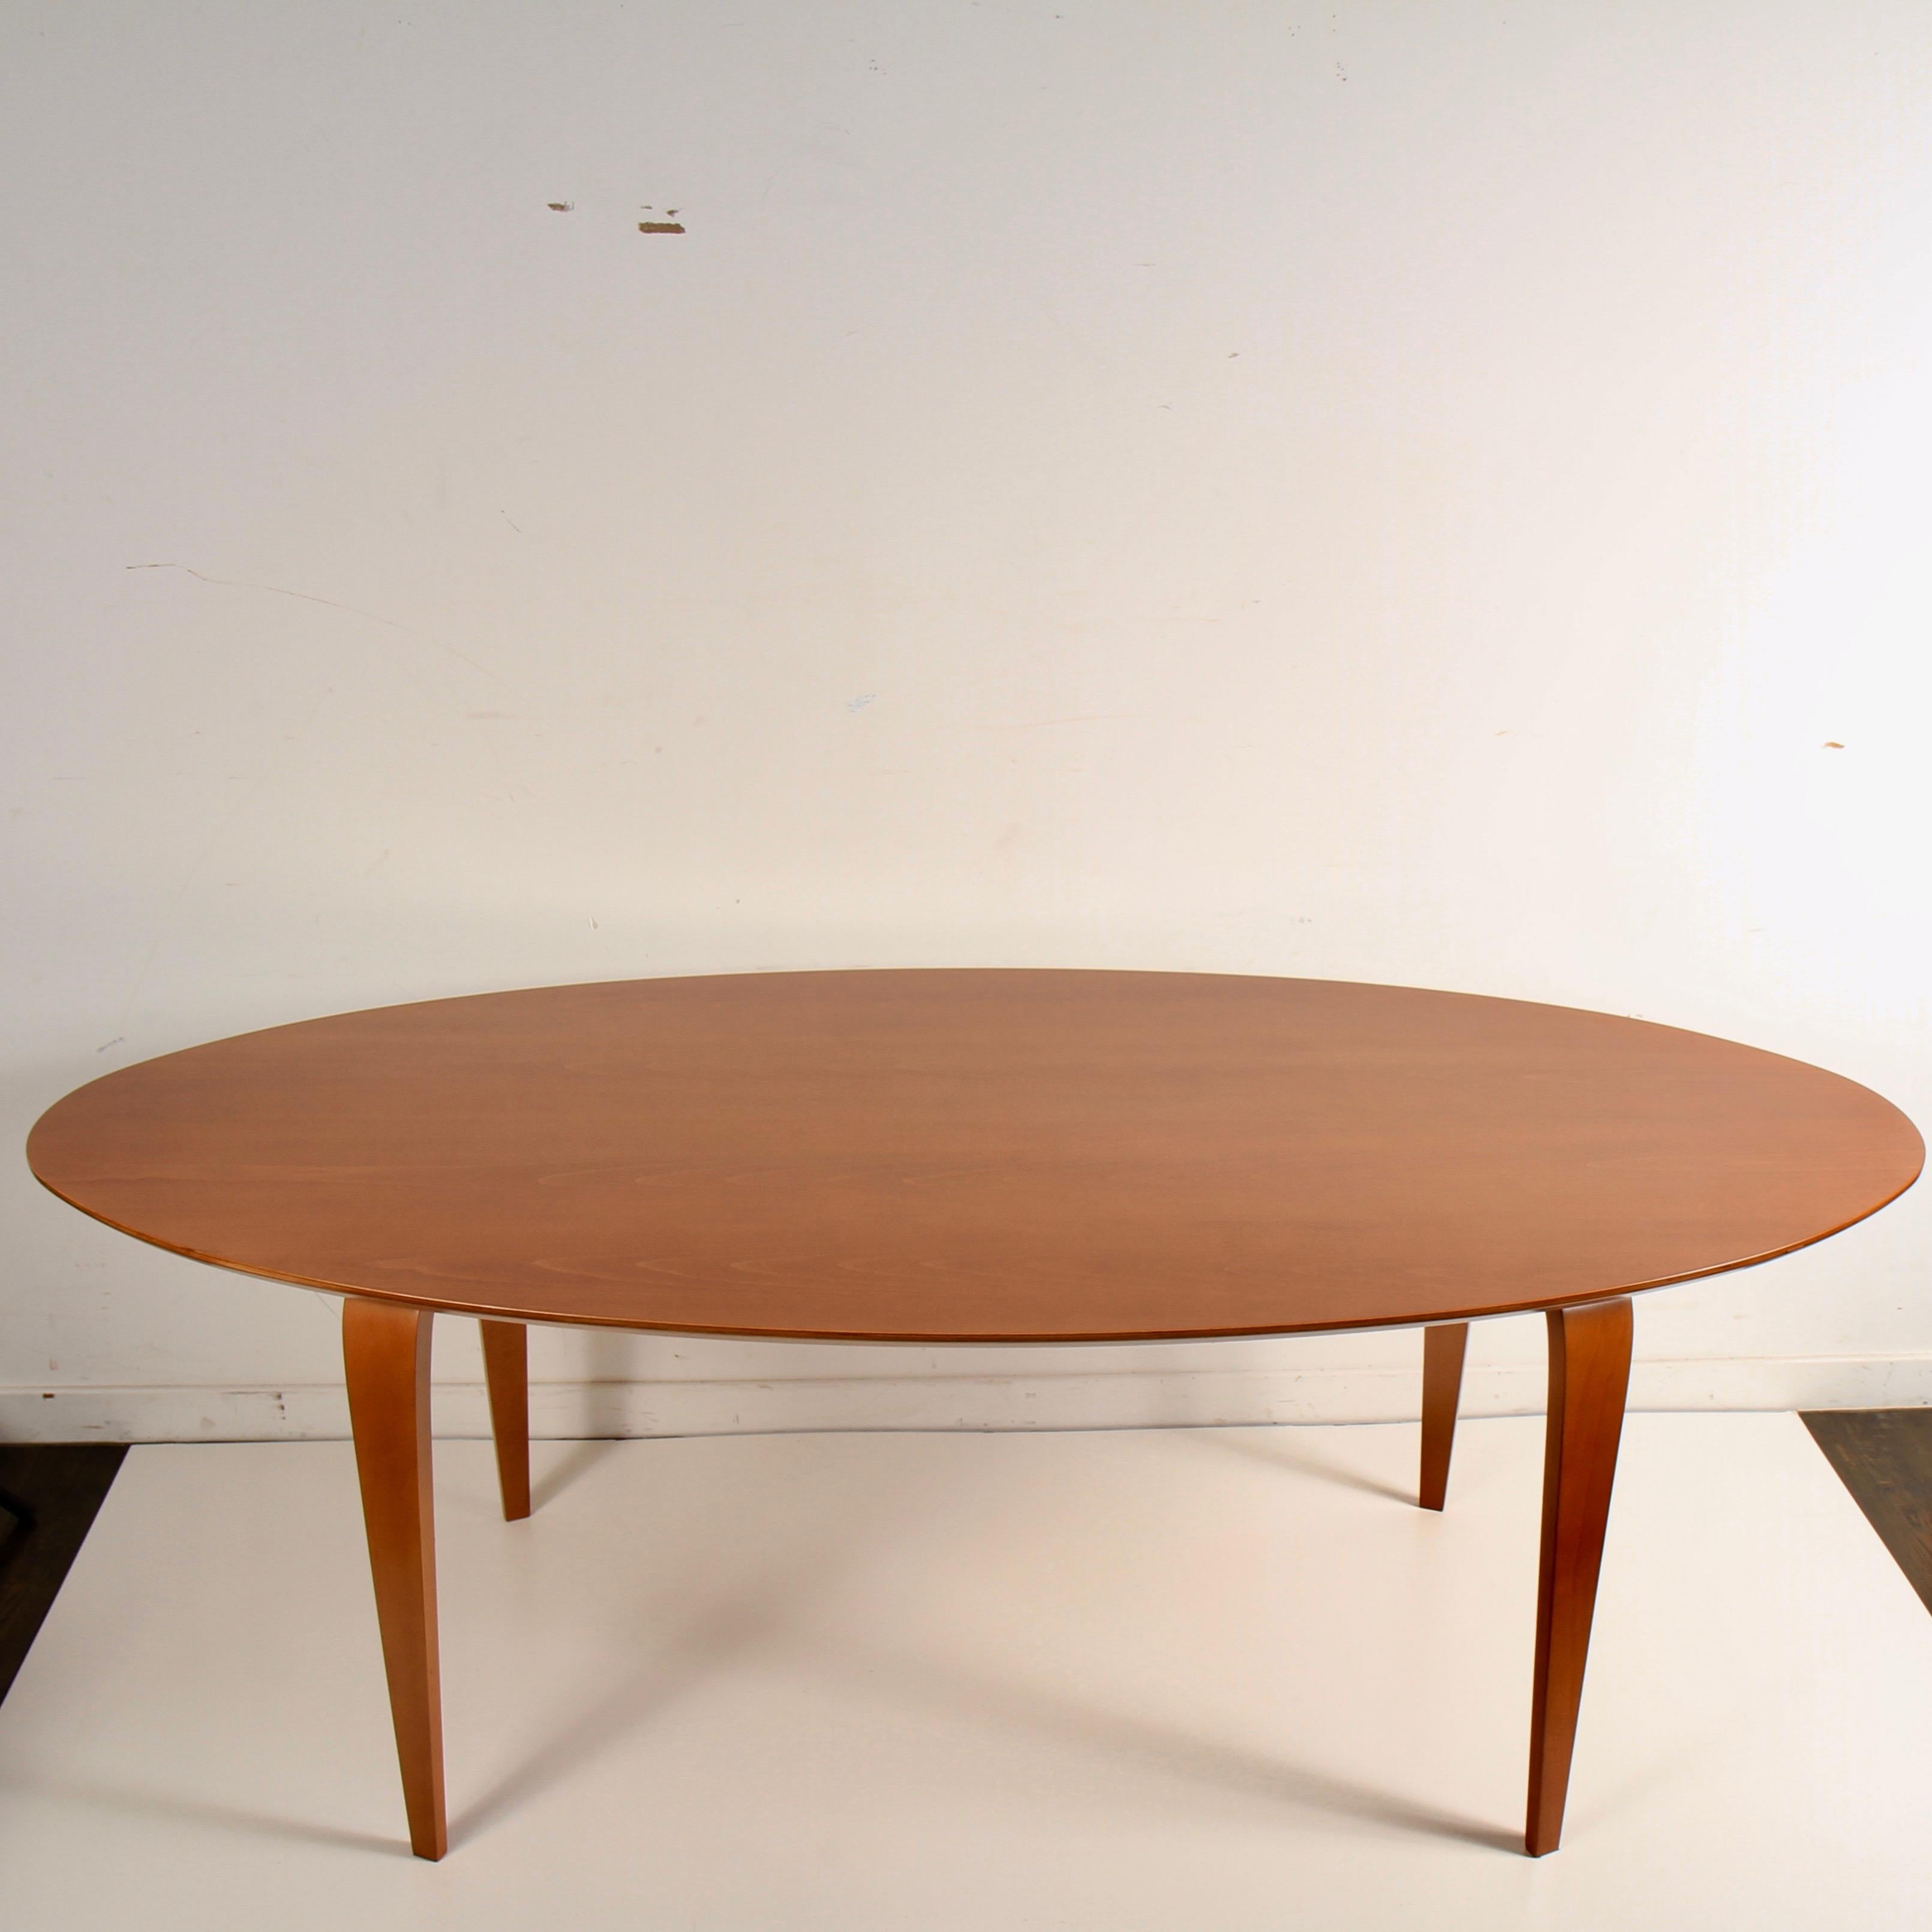 Newly refinished, European beech, molded plywood table by Benjamin Cherner, son of Norman Cherner.

Norman Cherner's sons formed the Cherner Chair Company in 1999 to manufacture and market some of the most recognized designs from their father's